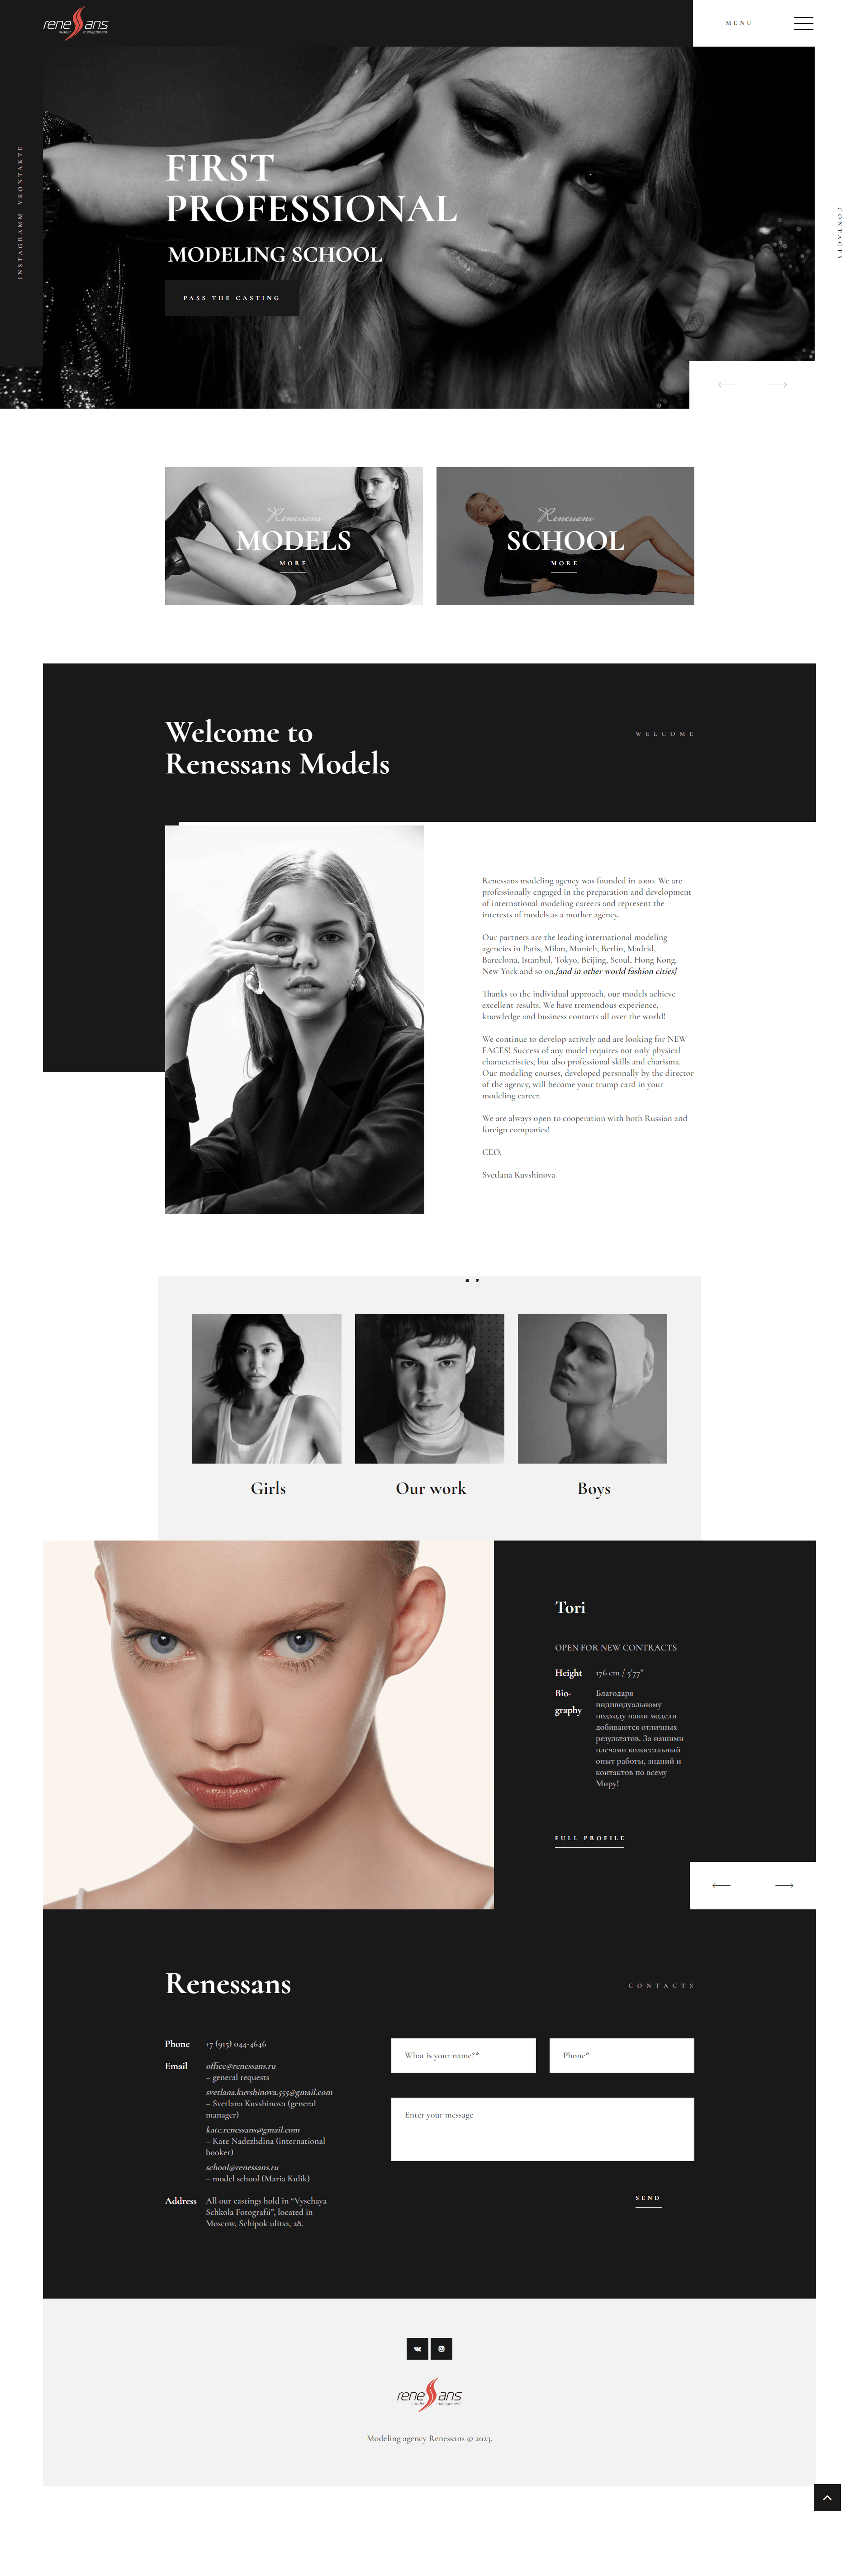 Renessans model management. Main page, developed by Magnum Opus.